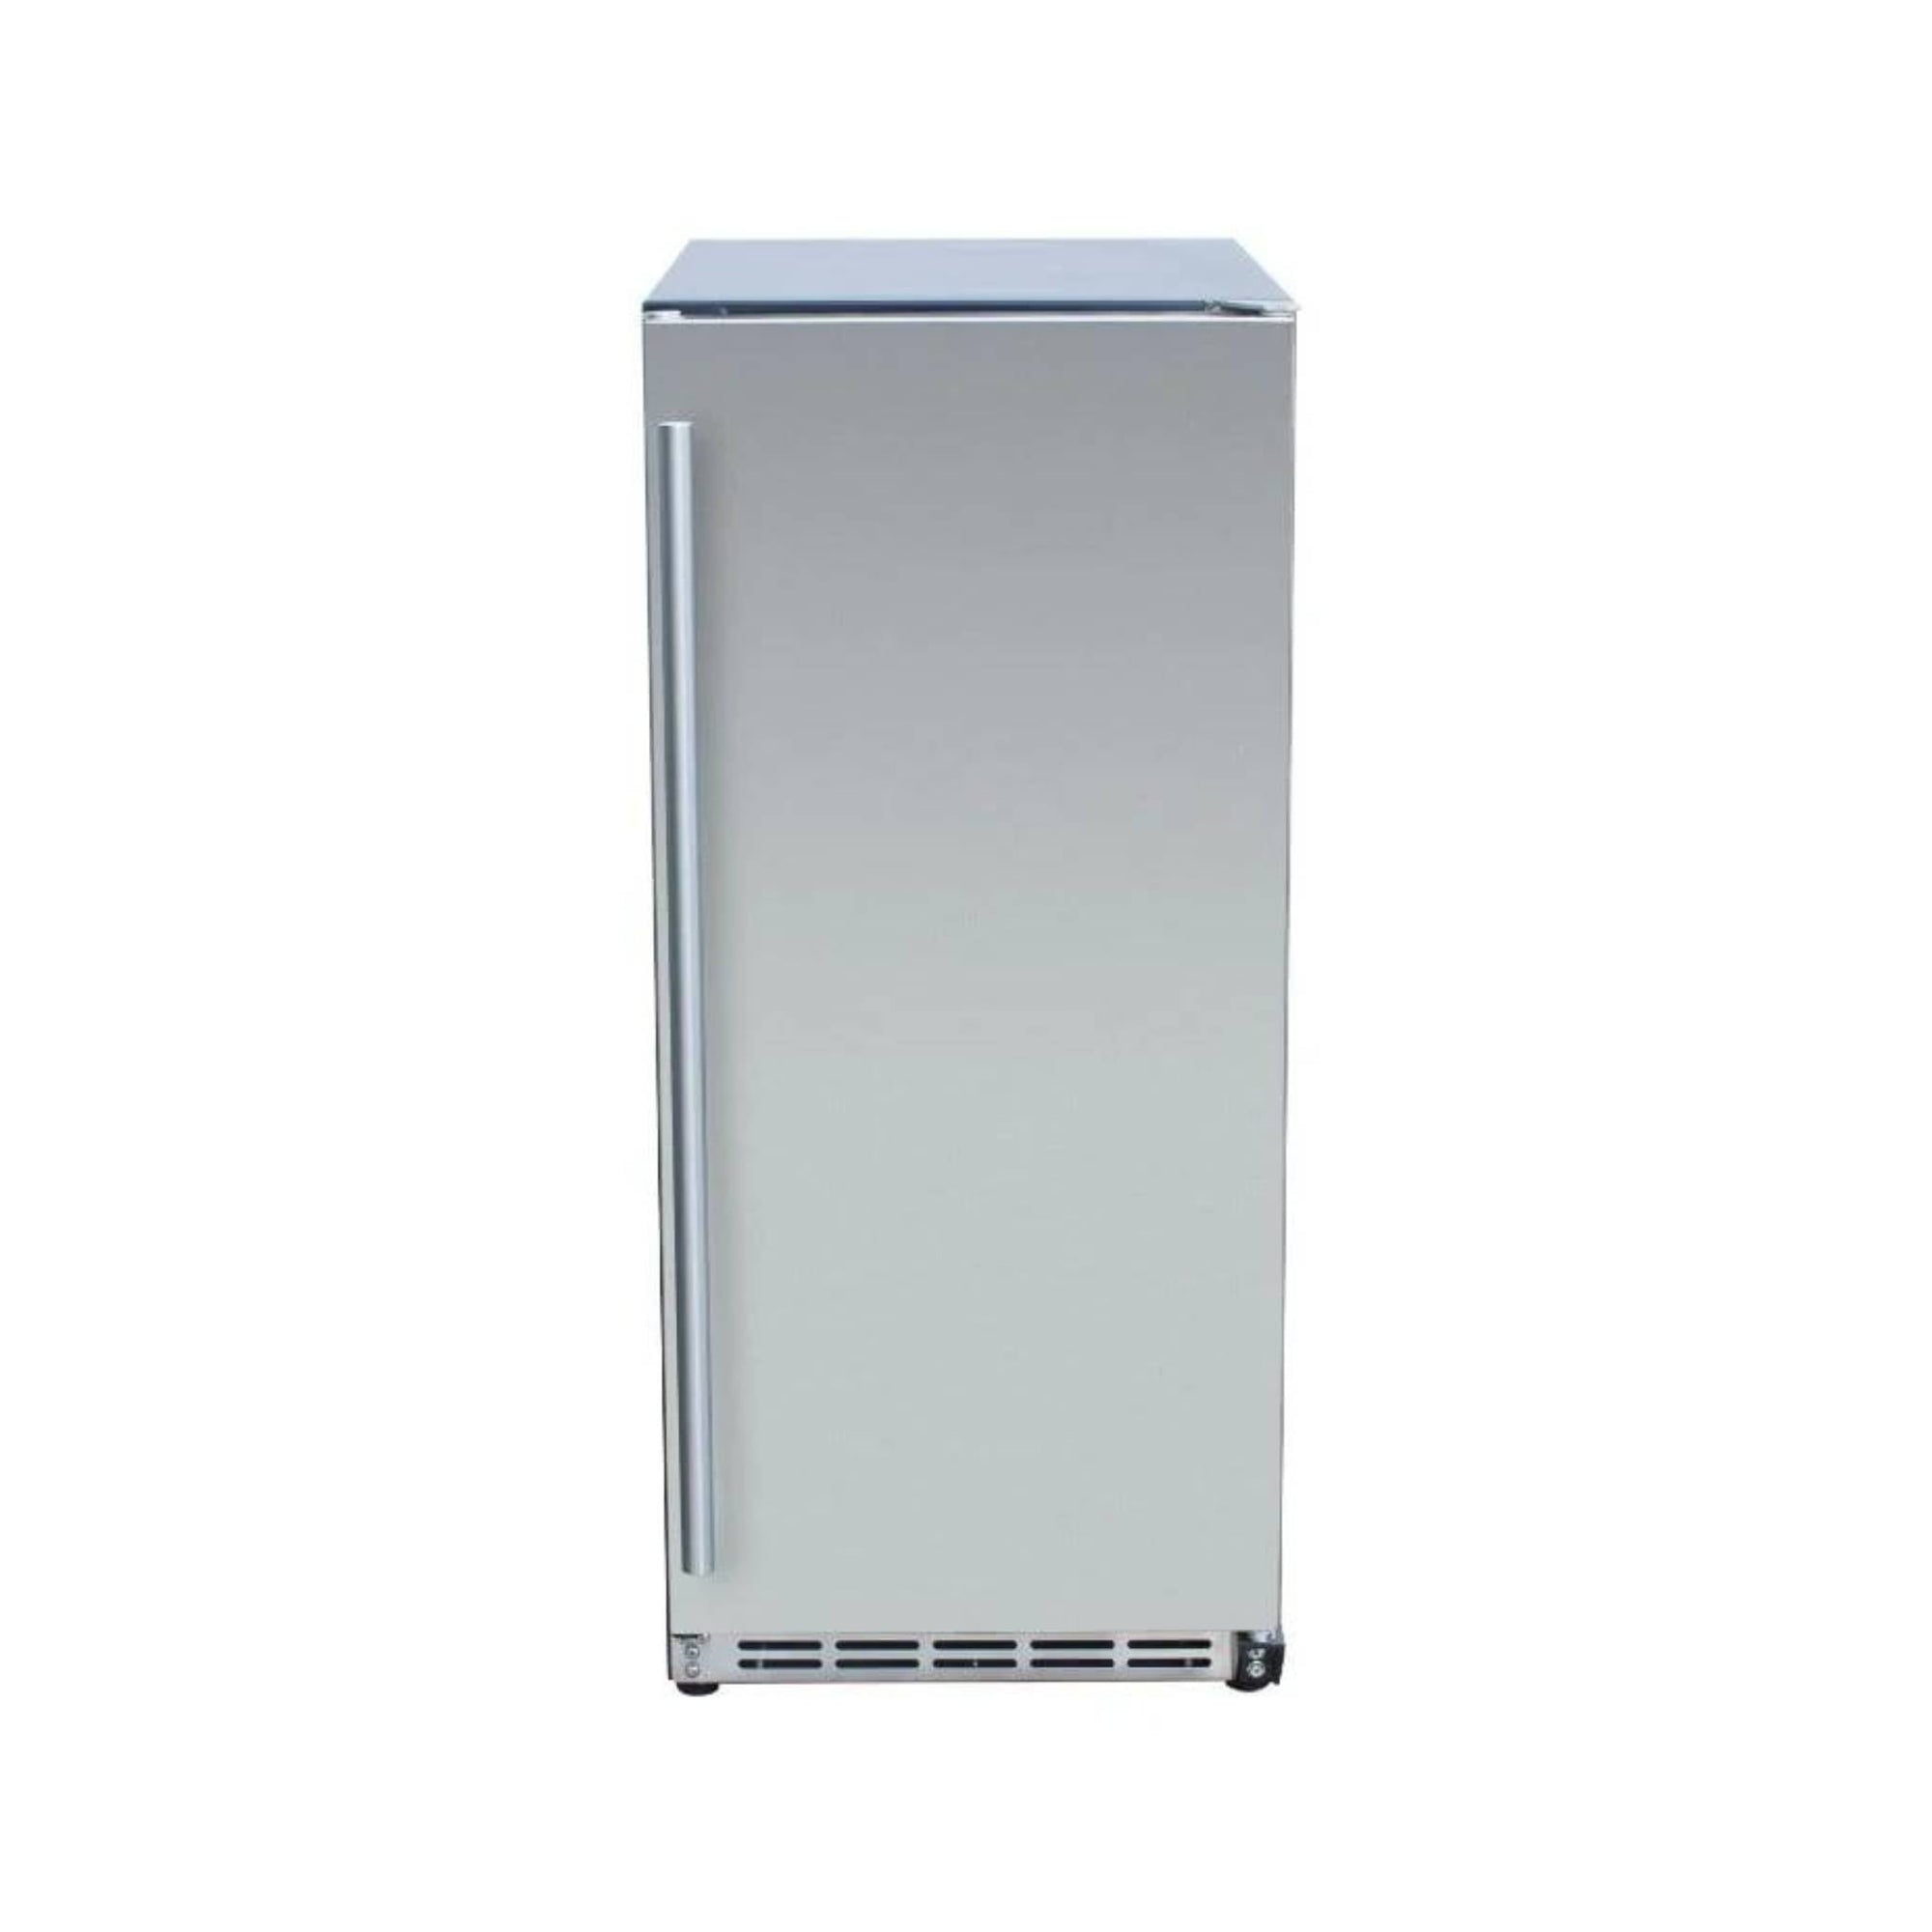 Summerset 15" Outdoor Rated Fridge with Stainless Door - Culinary Hardware